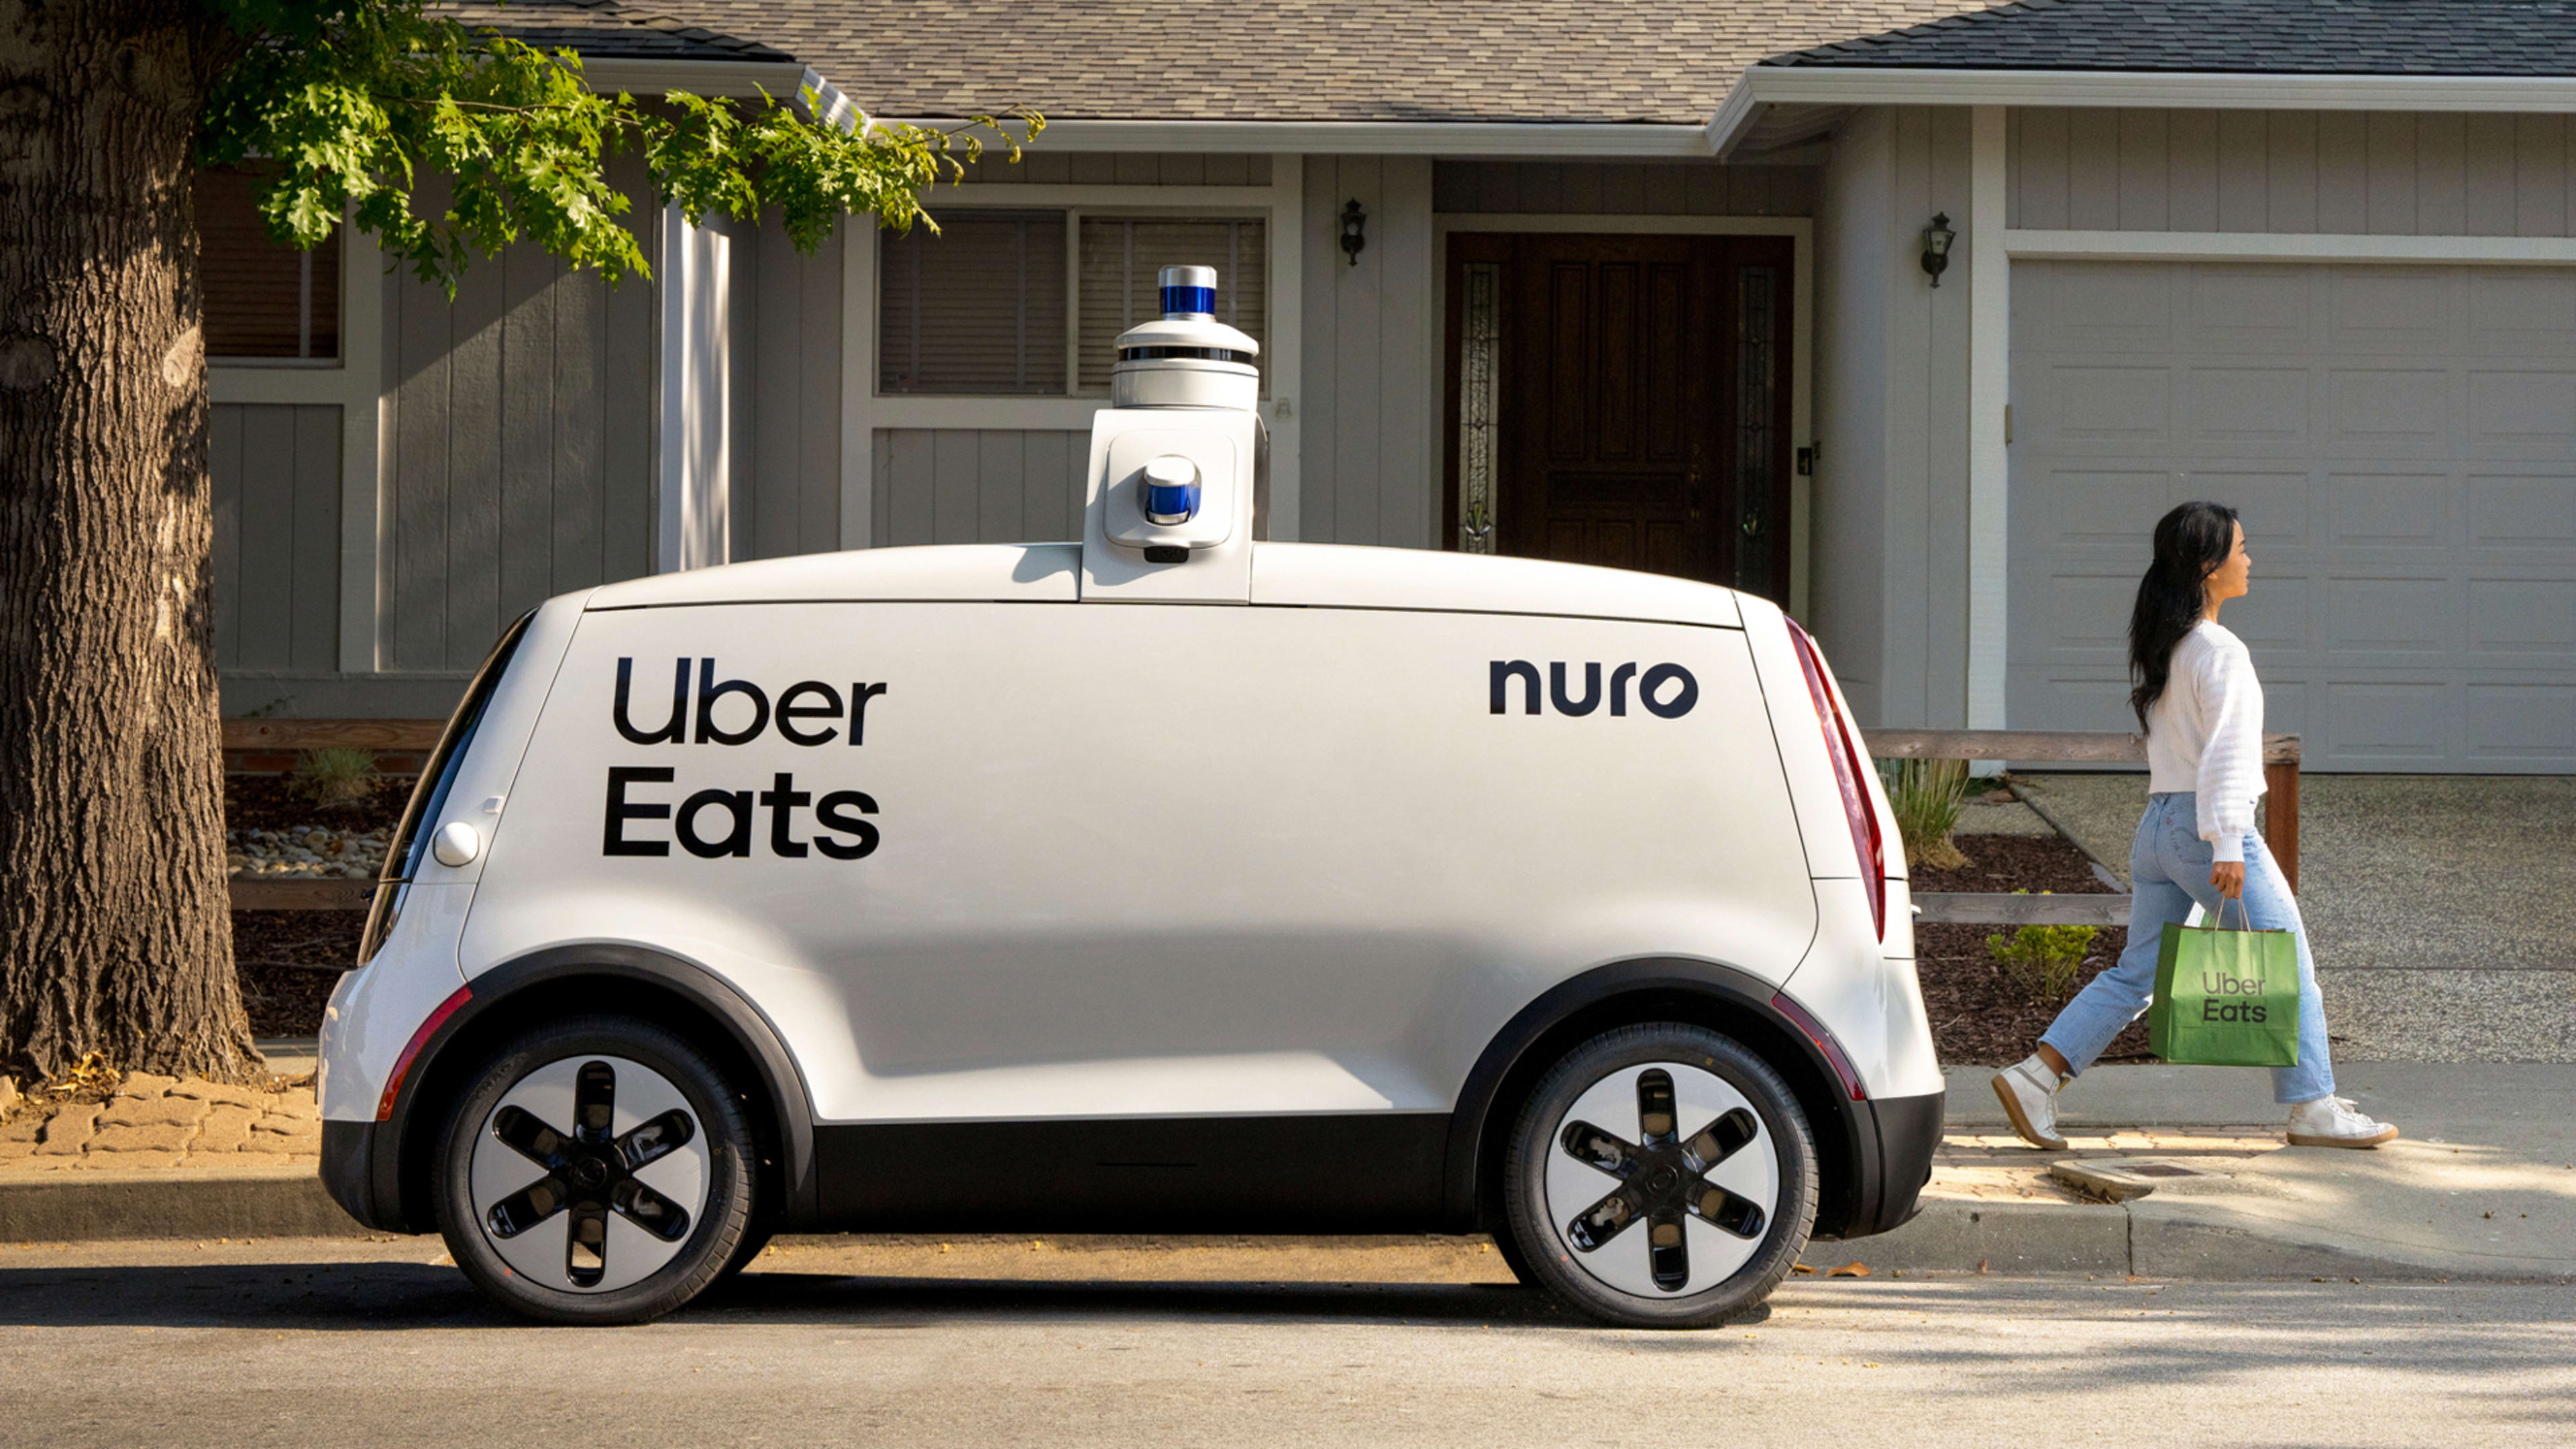 Uber Eats is partnering with autonomous vehicle company Nuro for deliveries